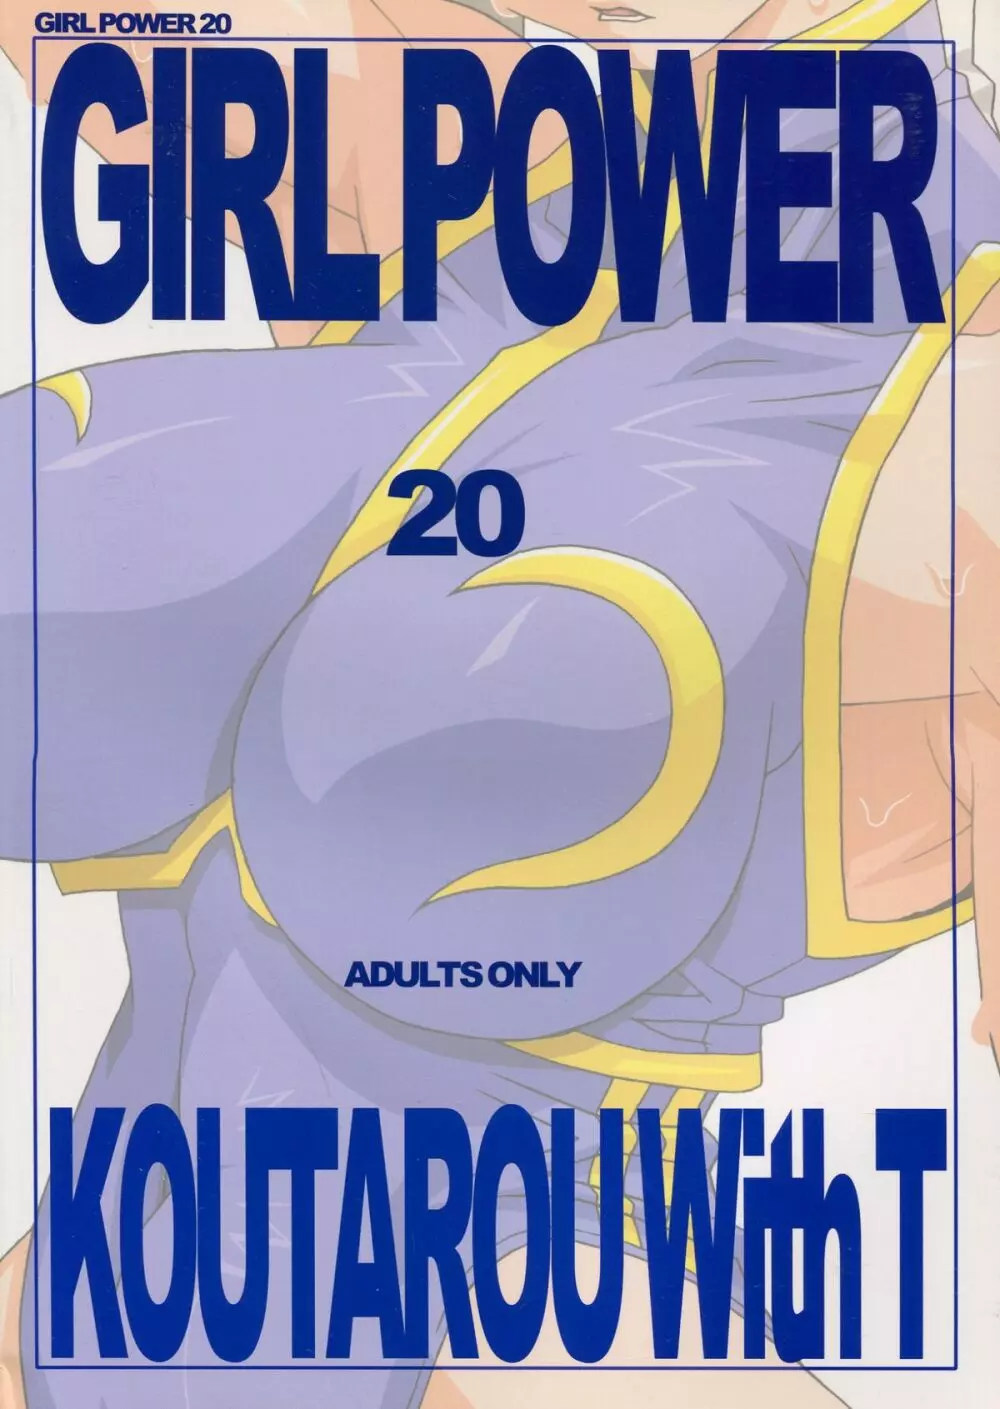 GIRL POWER vol.20 - page2